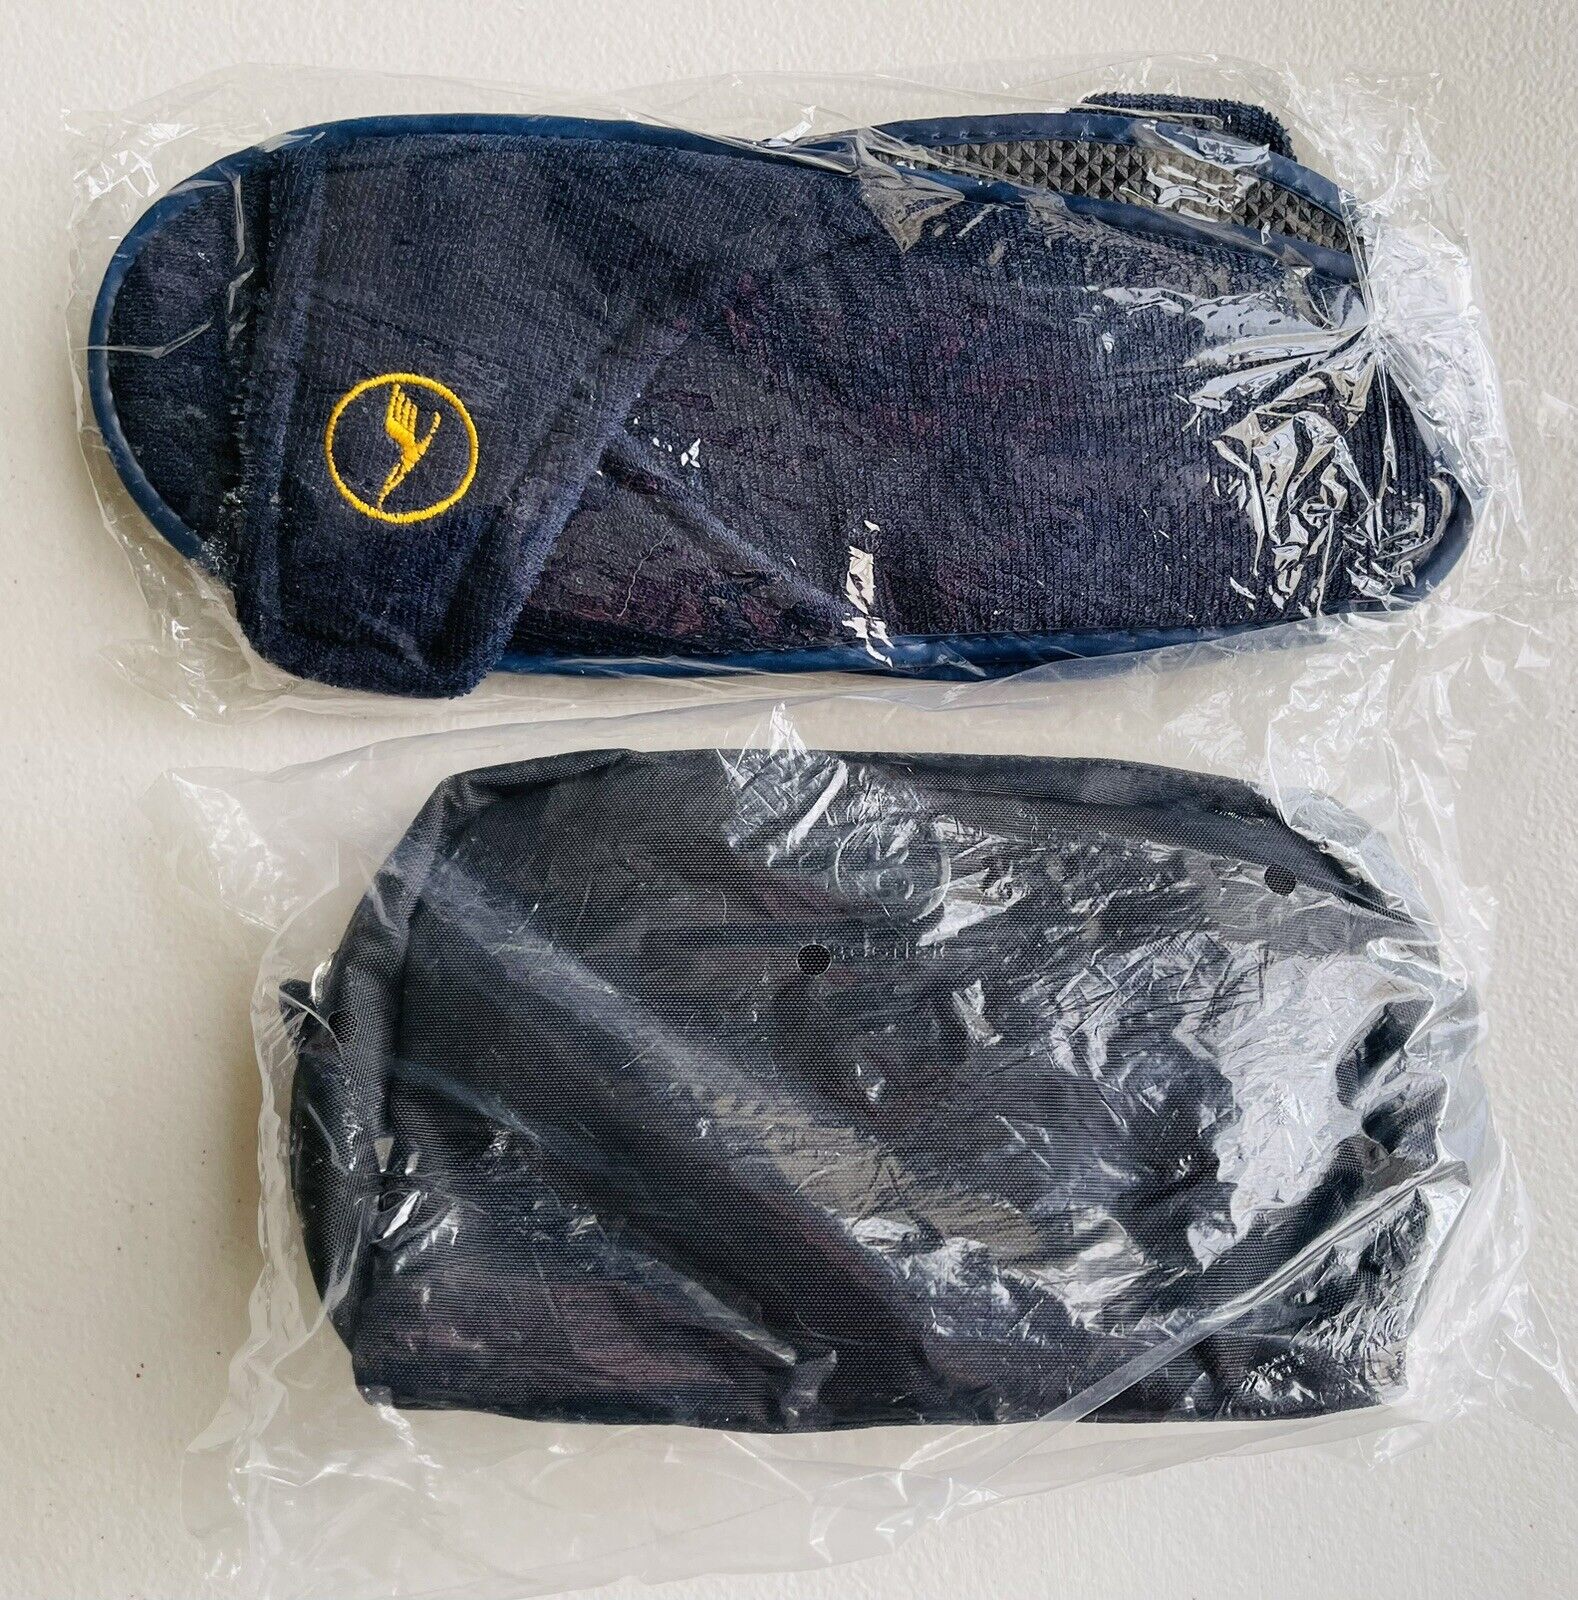 Lufthansa Airlines Bogner Amenity Kit - Pouch Kit Style + Slippers - Unopened